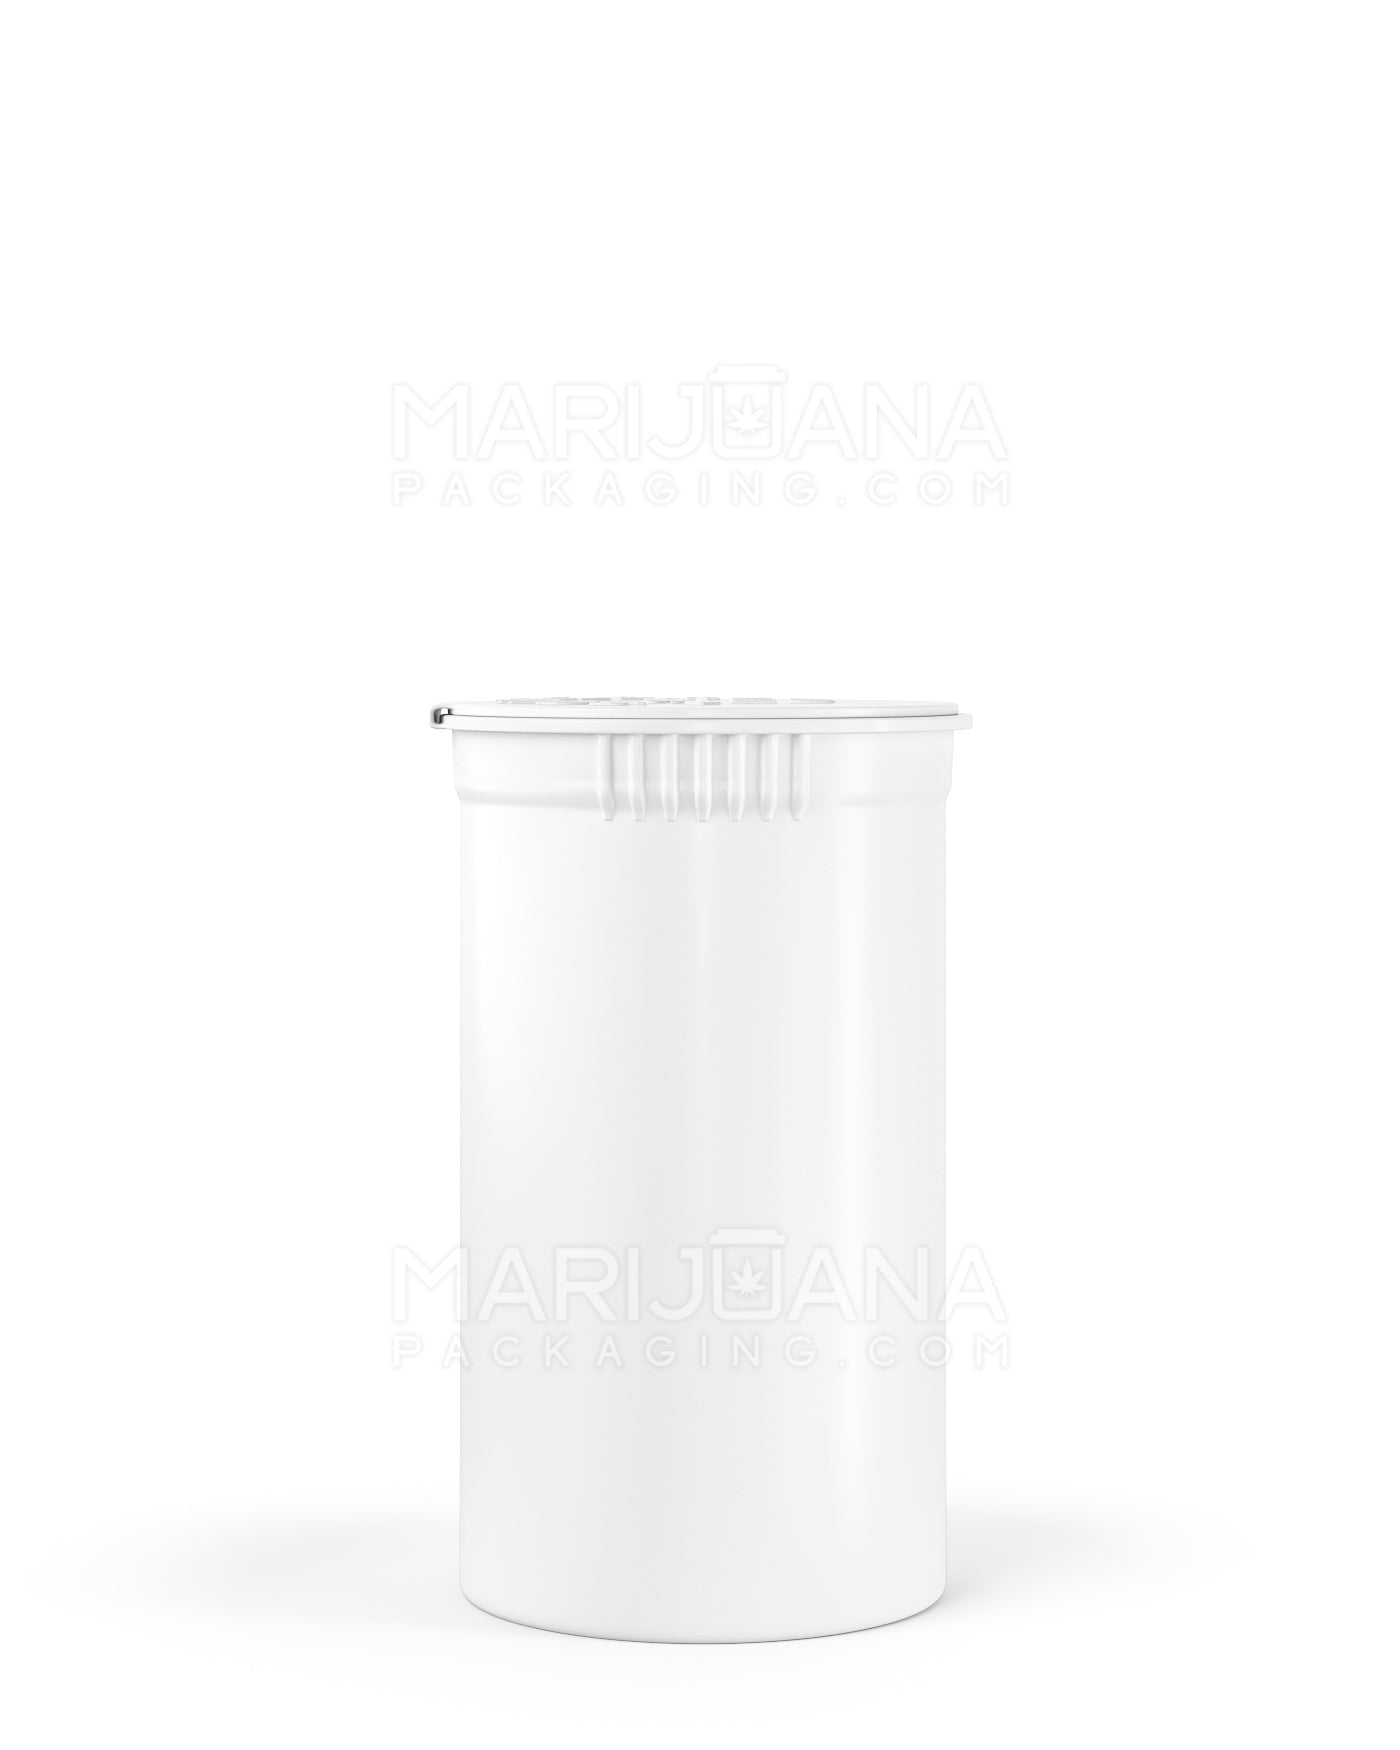 Child Resistant & Sustainable | 100% Biodegradable Opaque White Pop Top Bottles | 19dr - 3.5g - 225 Count - 2